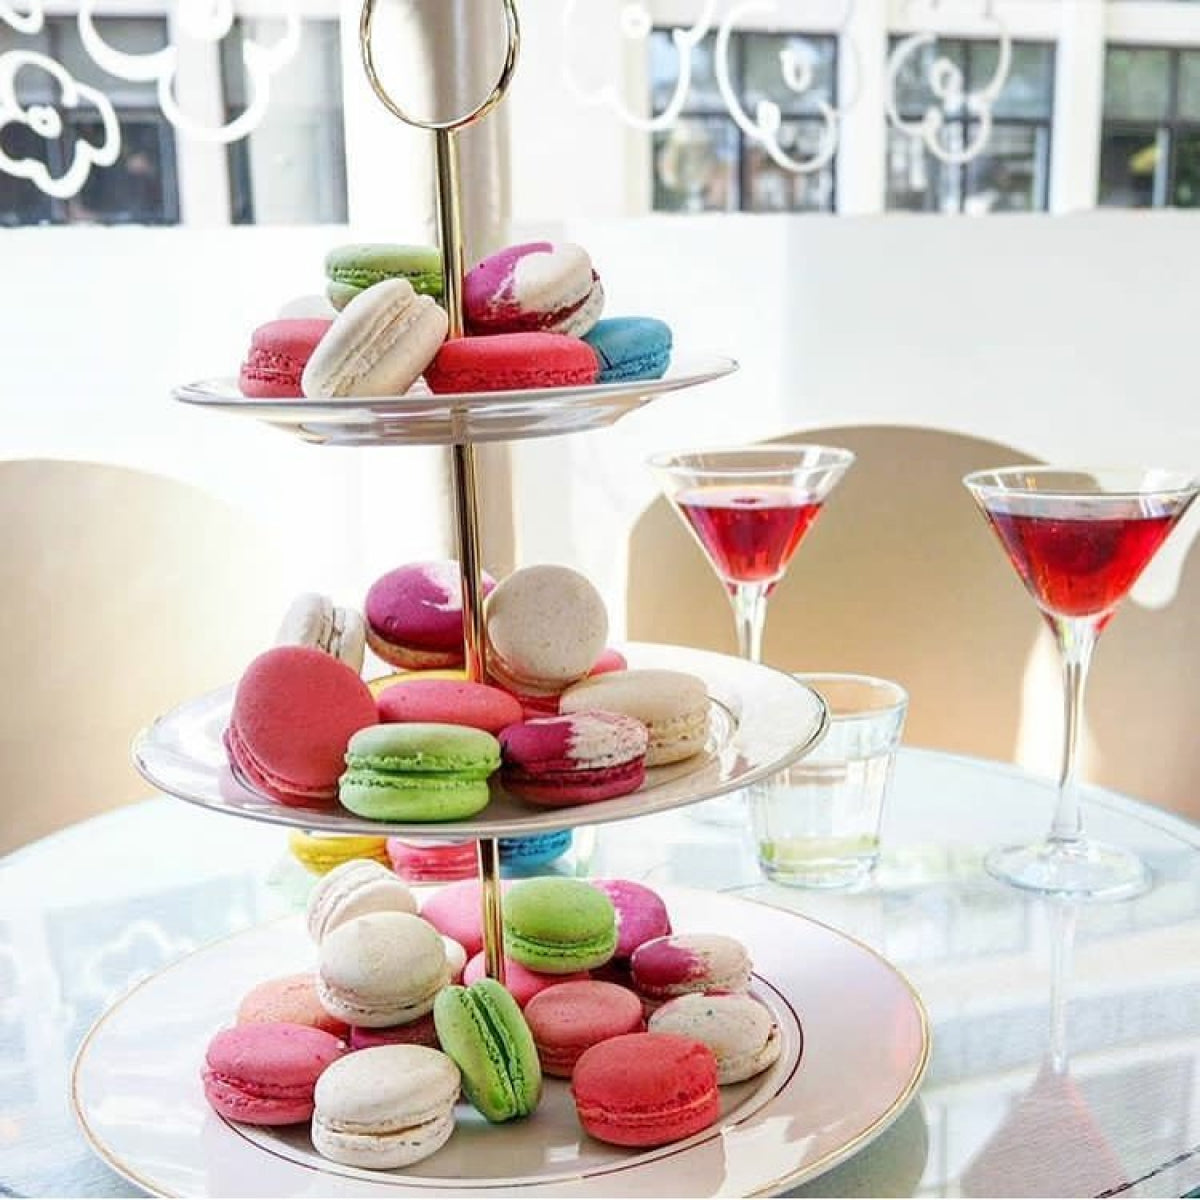 A three-tiered plate of multi-colored macarons accompanied by martinis at a hen party at Oh La La! Macarons